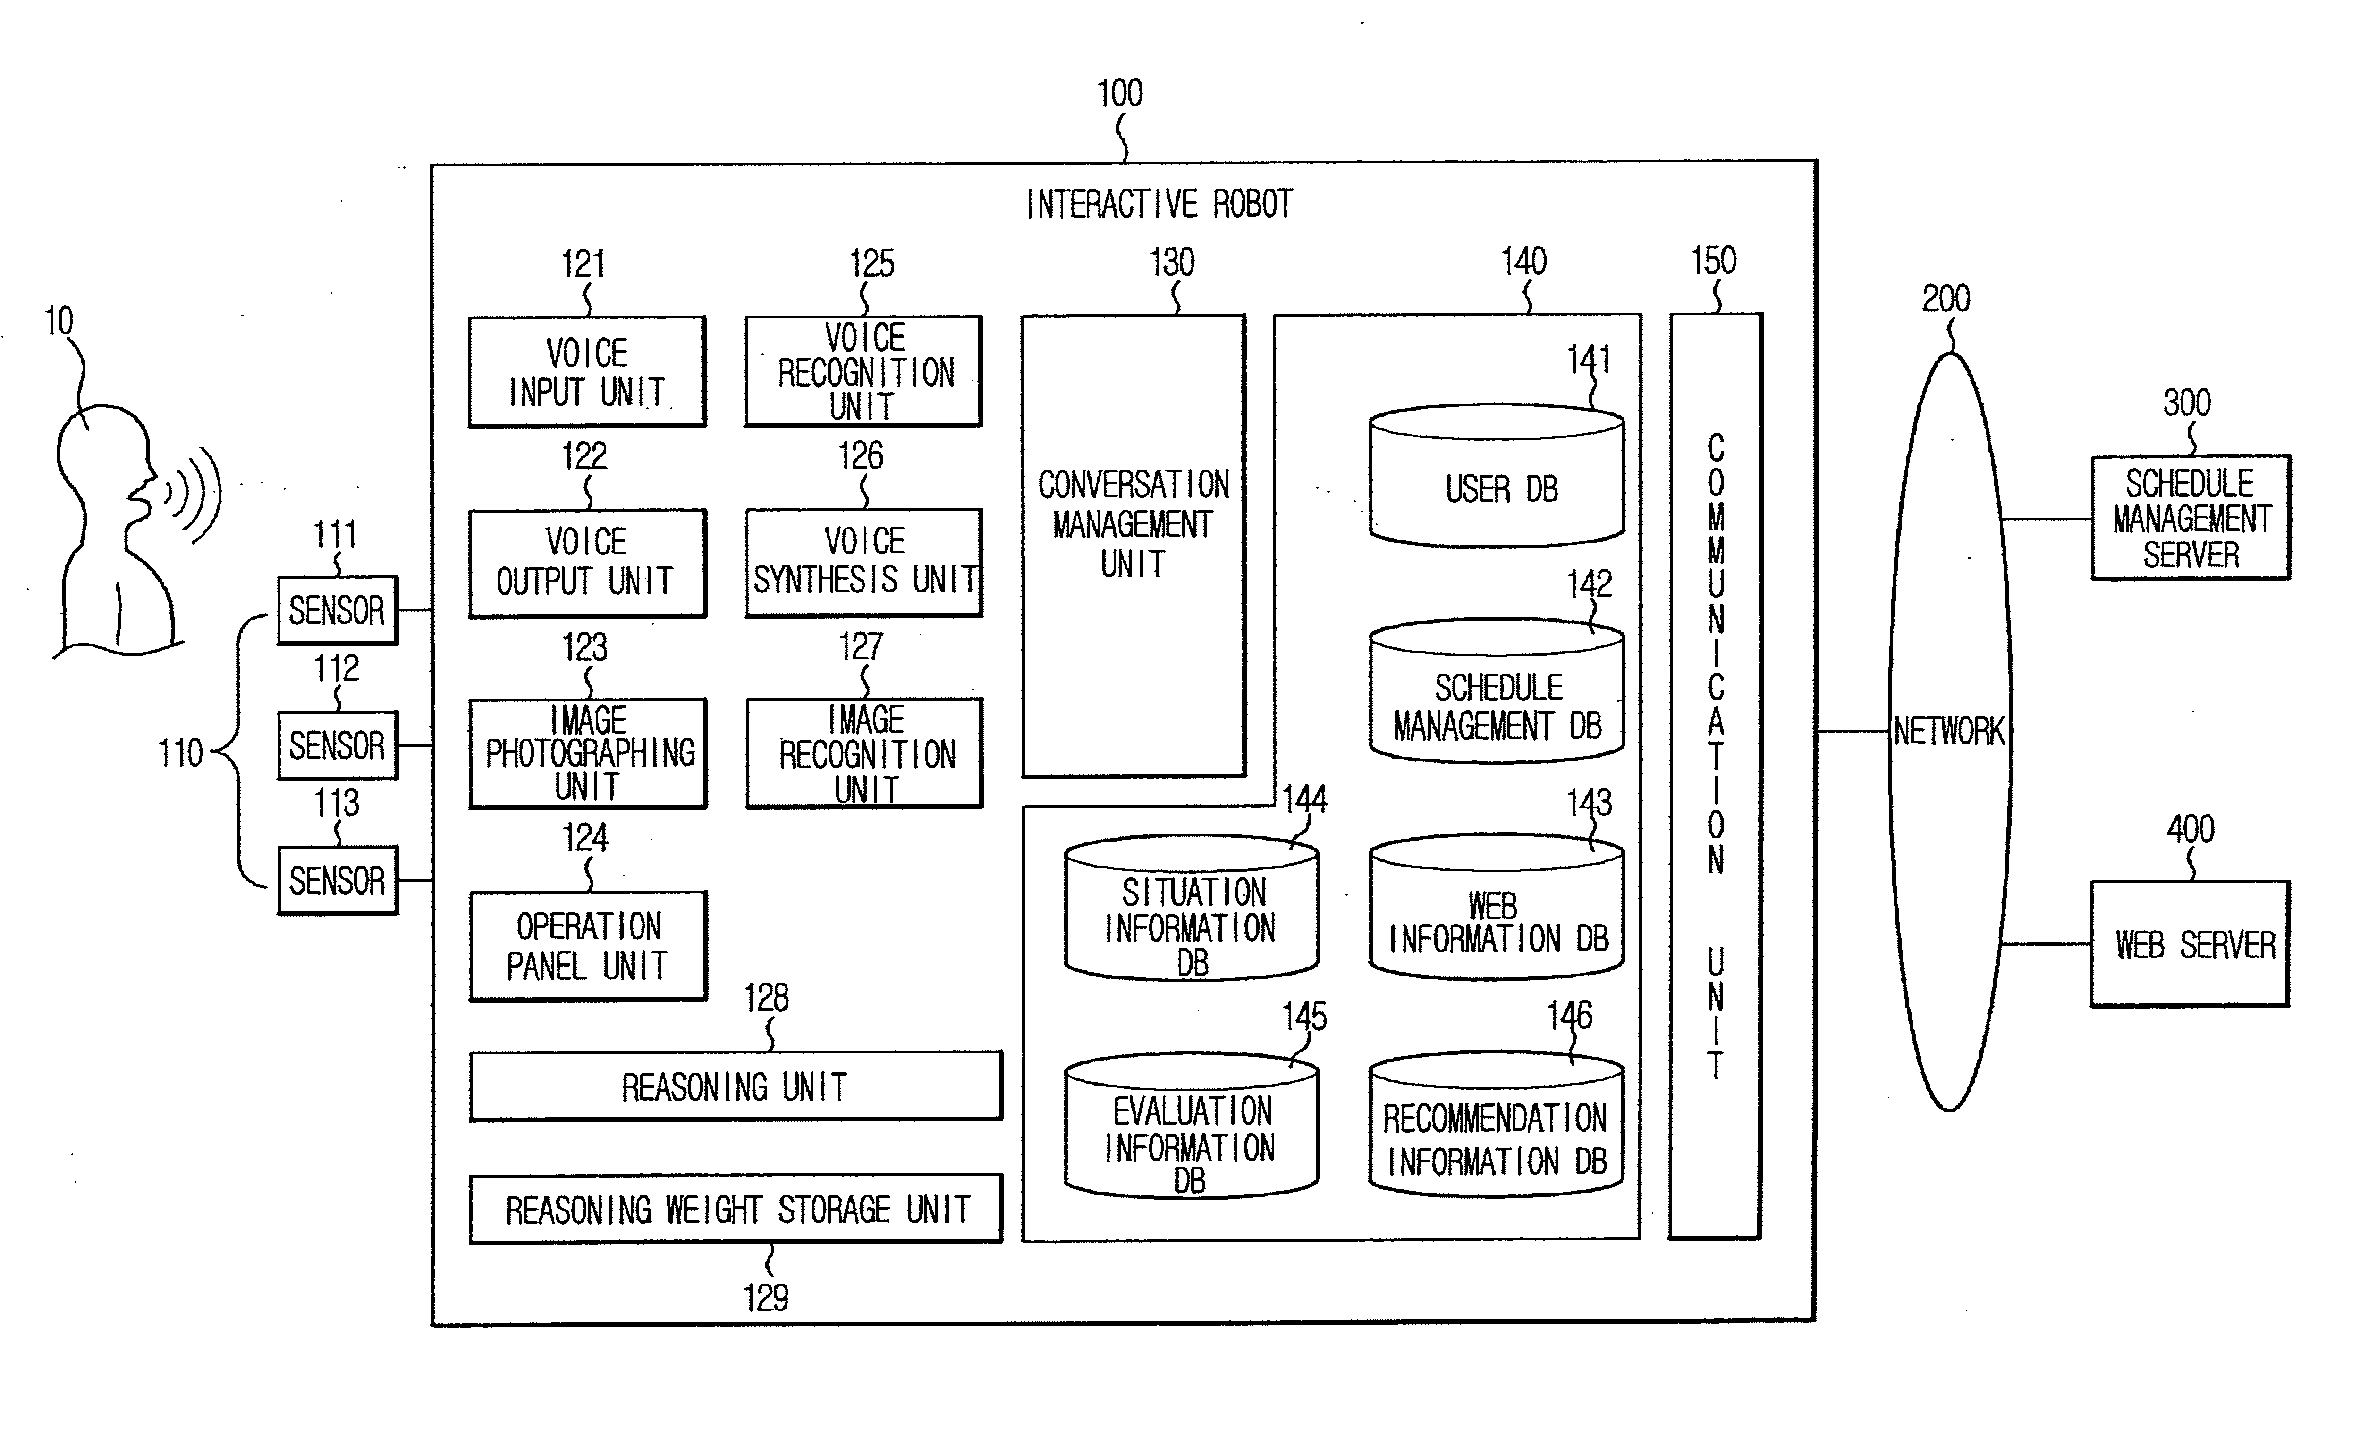 Schedule management system using interactive robot  and method and computer-readable medium thereof